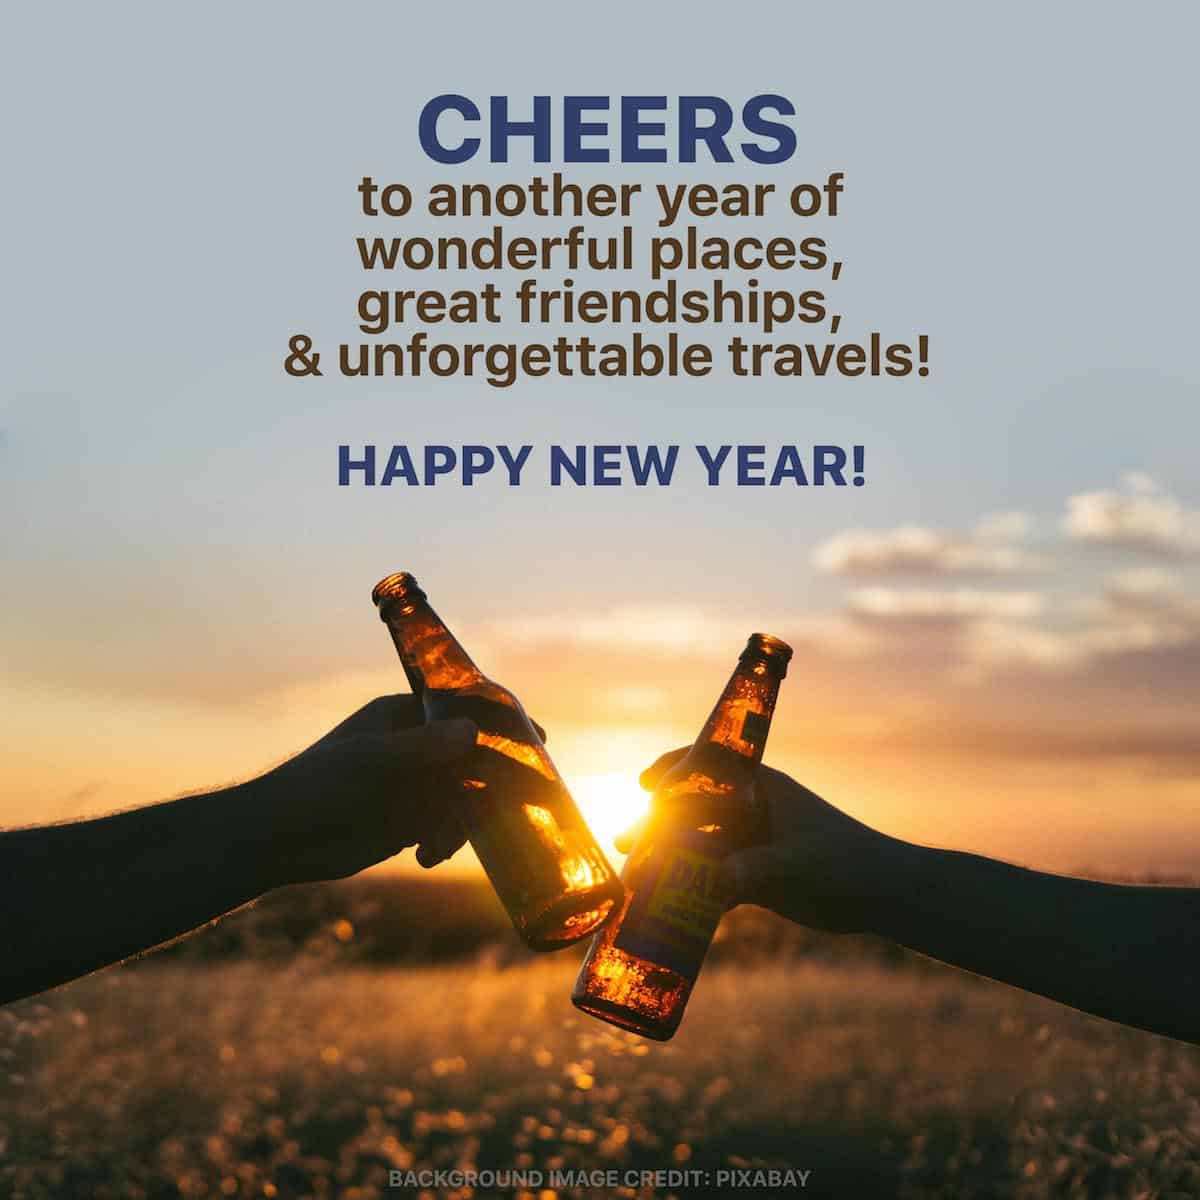 12 NEW YEAR QUOTES, WISHES & GREETINGS for Travelers | The Poor ...